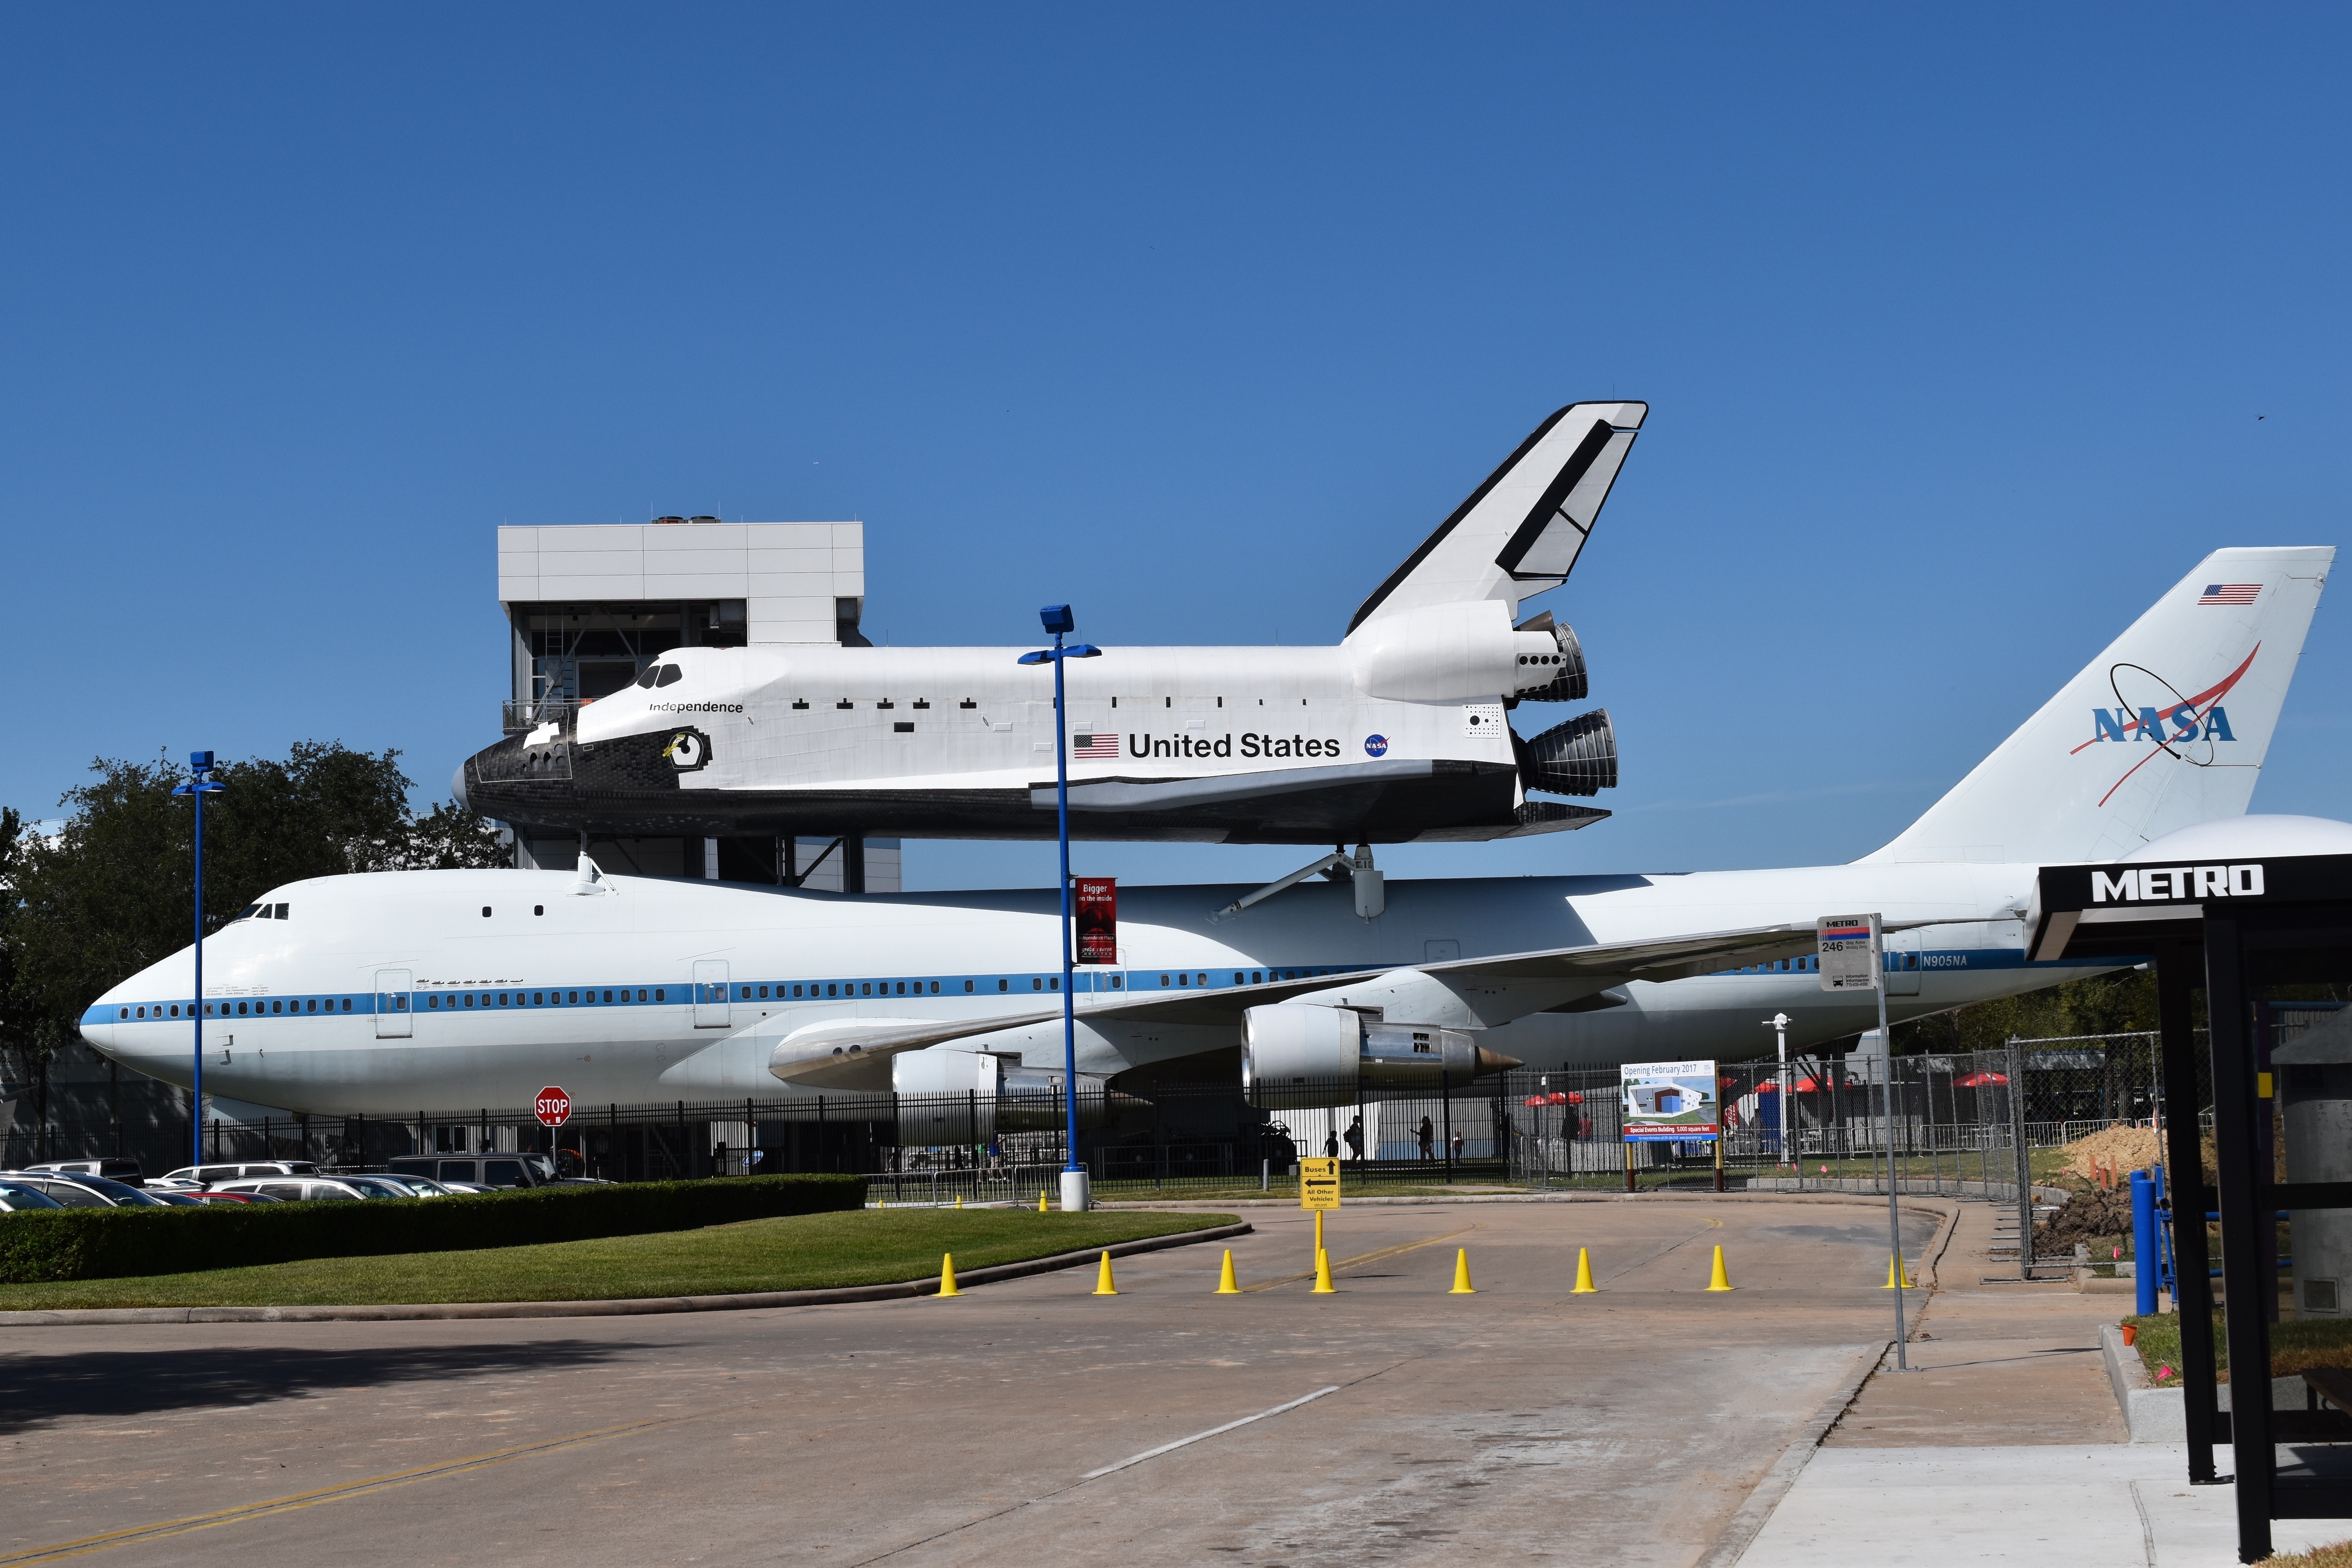 white nasa passenger plane with white and black united states space shuttle during day time